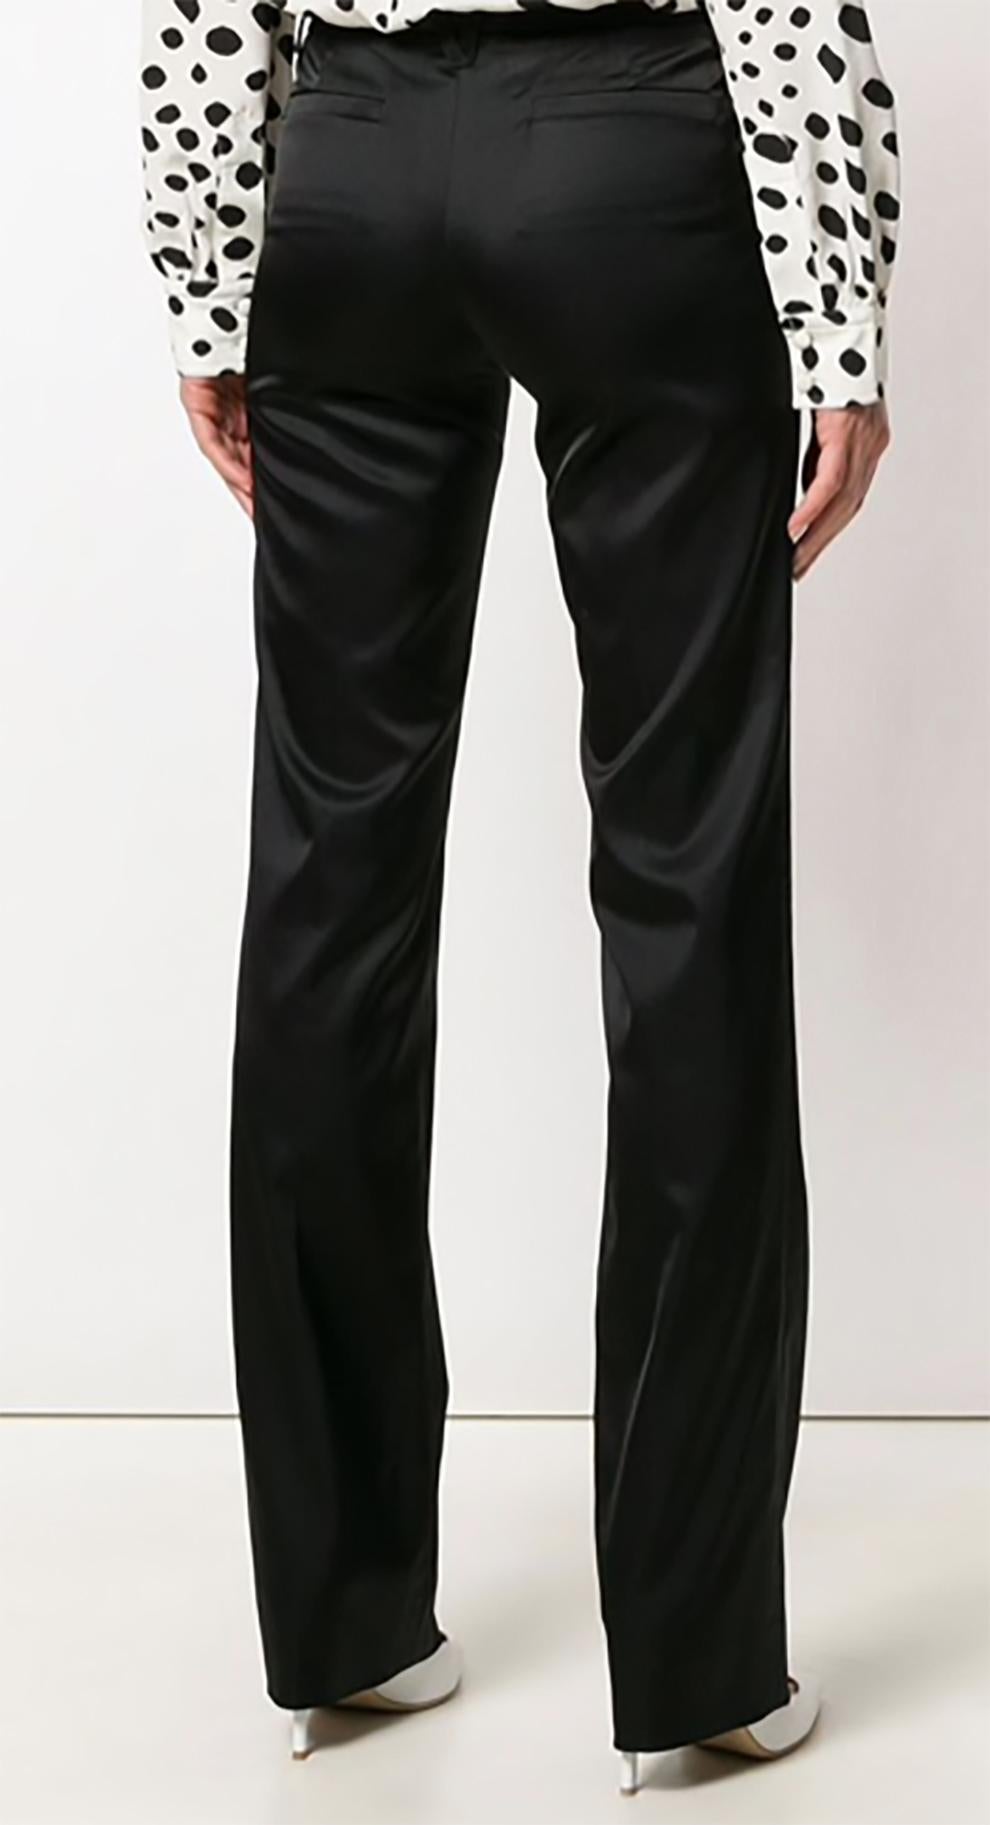 Versace black bootcut satin trousers featuring a low rise, a waistband with belt loops, a concealed front fastening, front welt pockets, rear welt pockets, a slim fit and a regular length. 
In excellent condition. Made in Italy. 
Estimated size